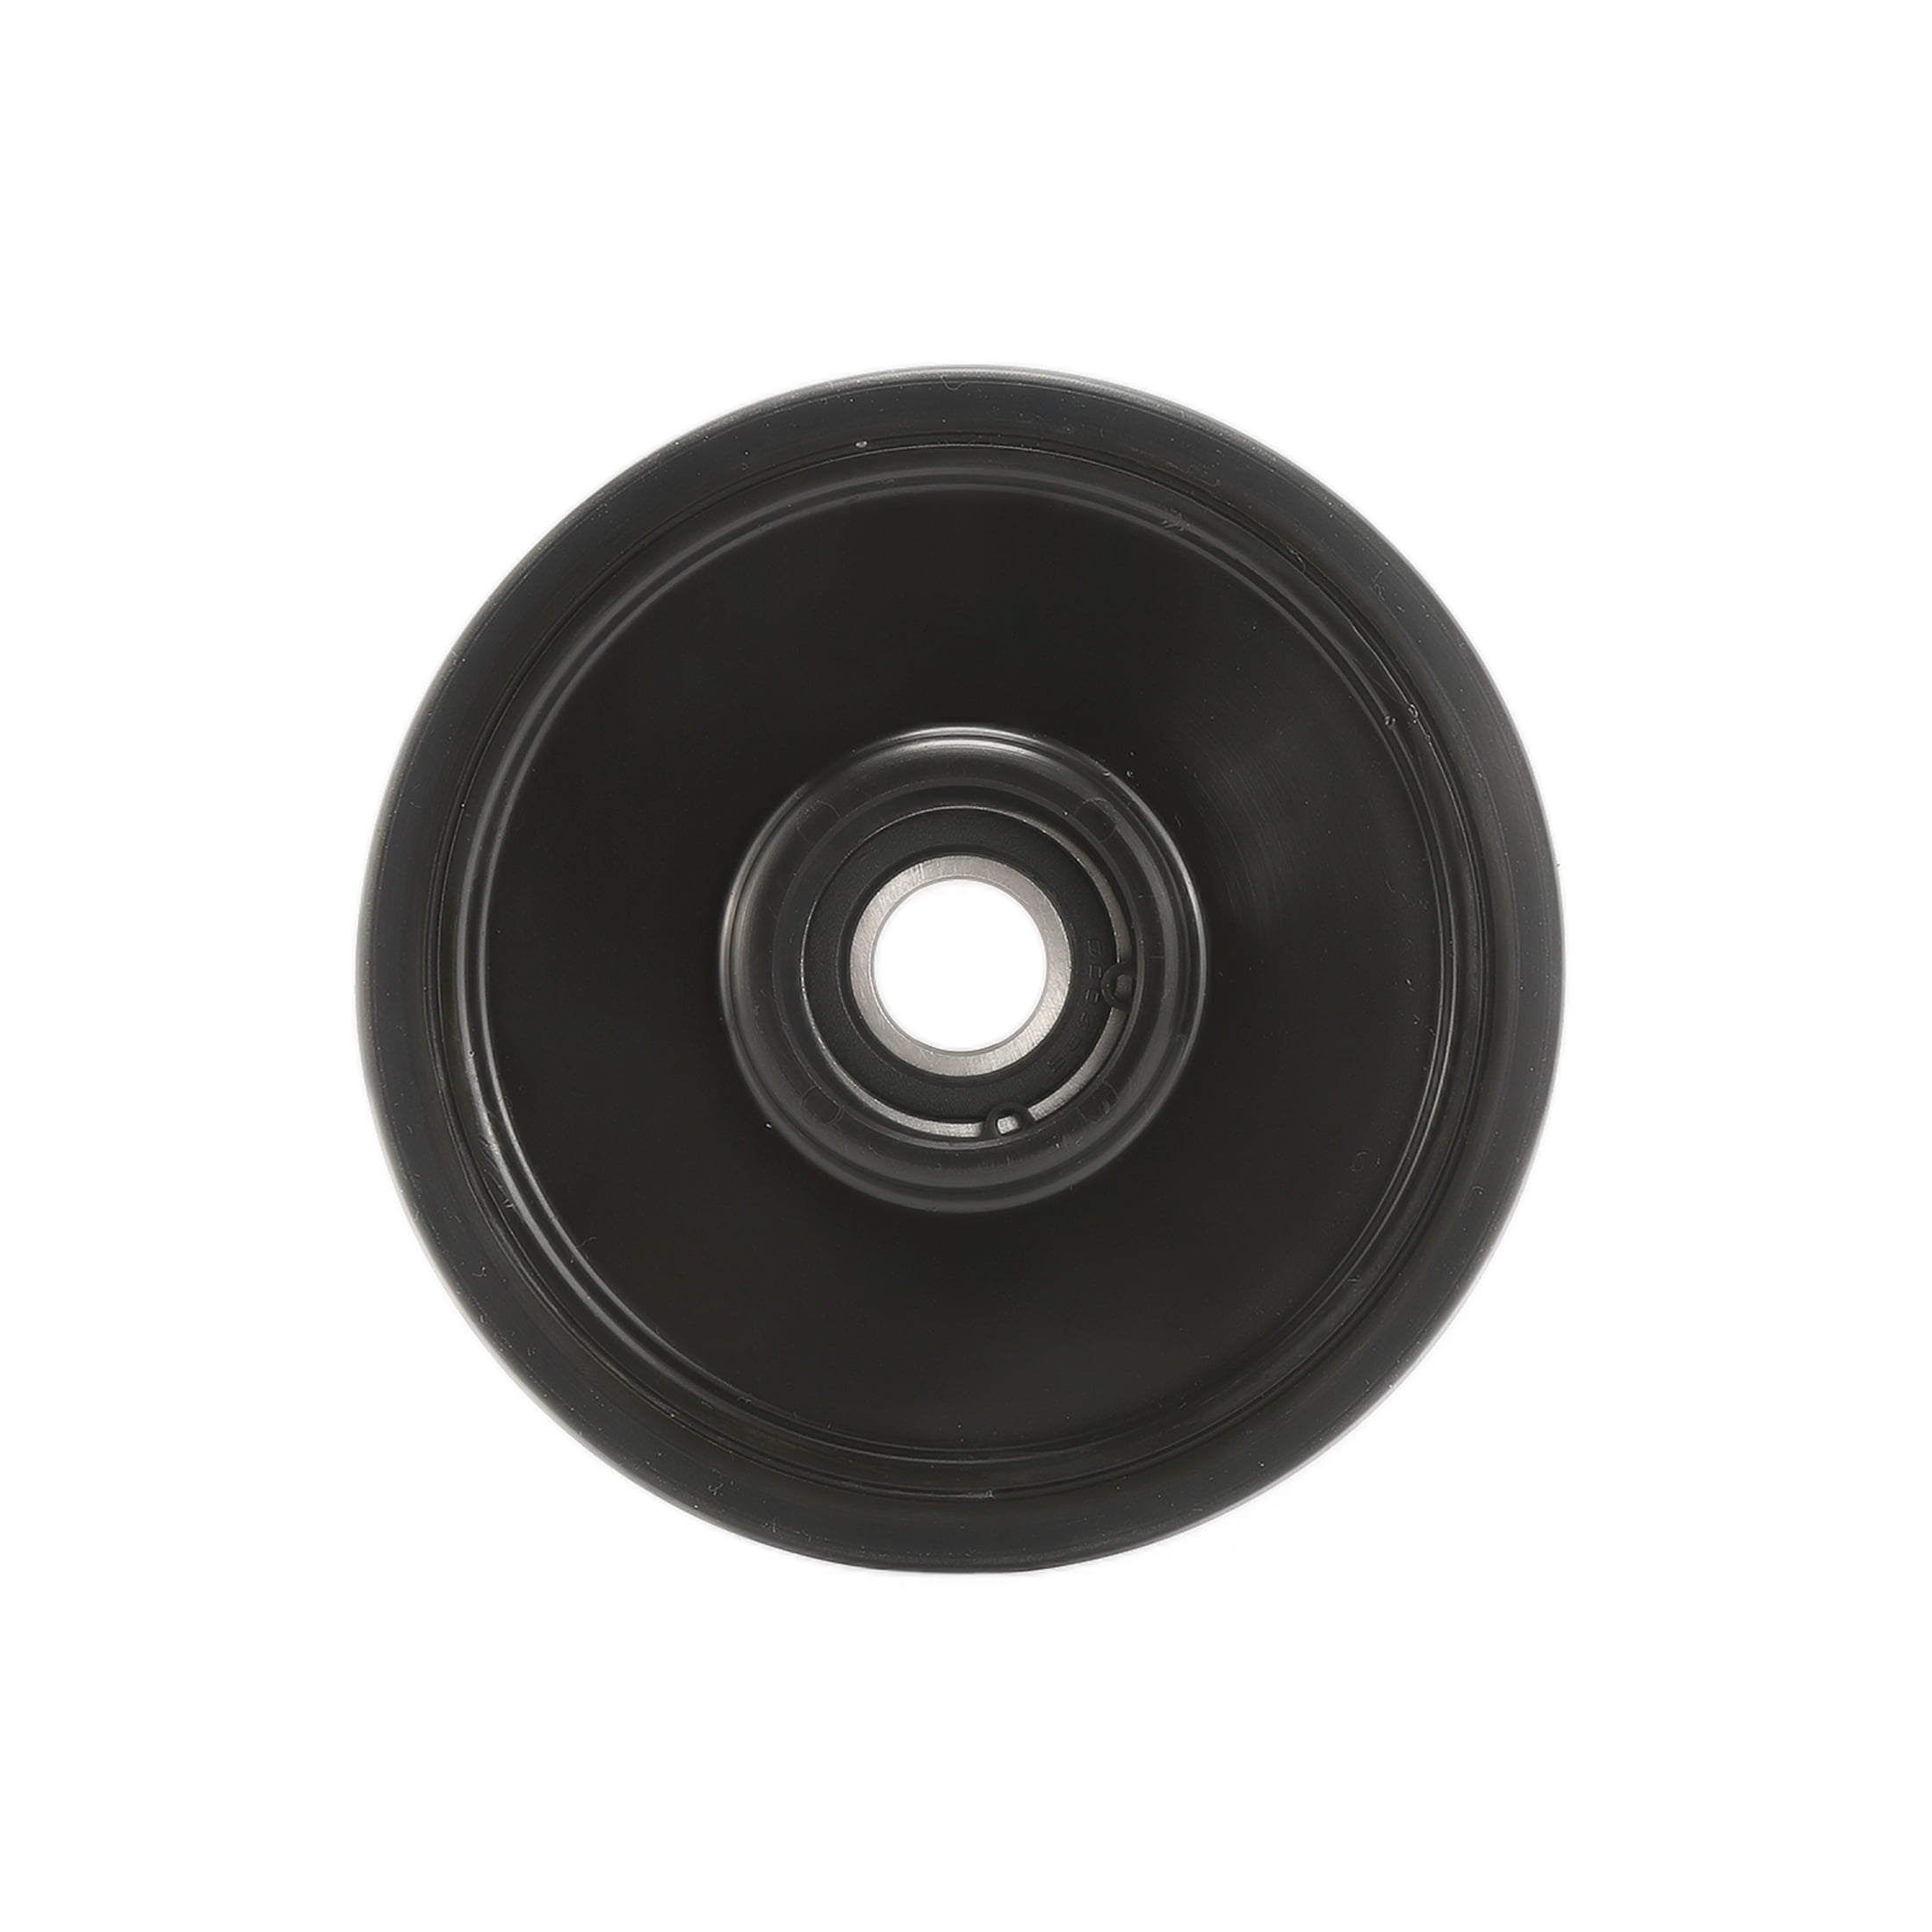 Arctic Cat Black ppd OEM 5.63 X 20mm Idler Wheel With Bearing 1604-837 3604-039 for sale online 